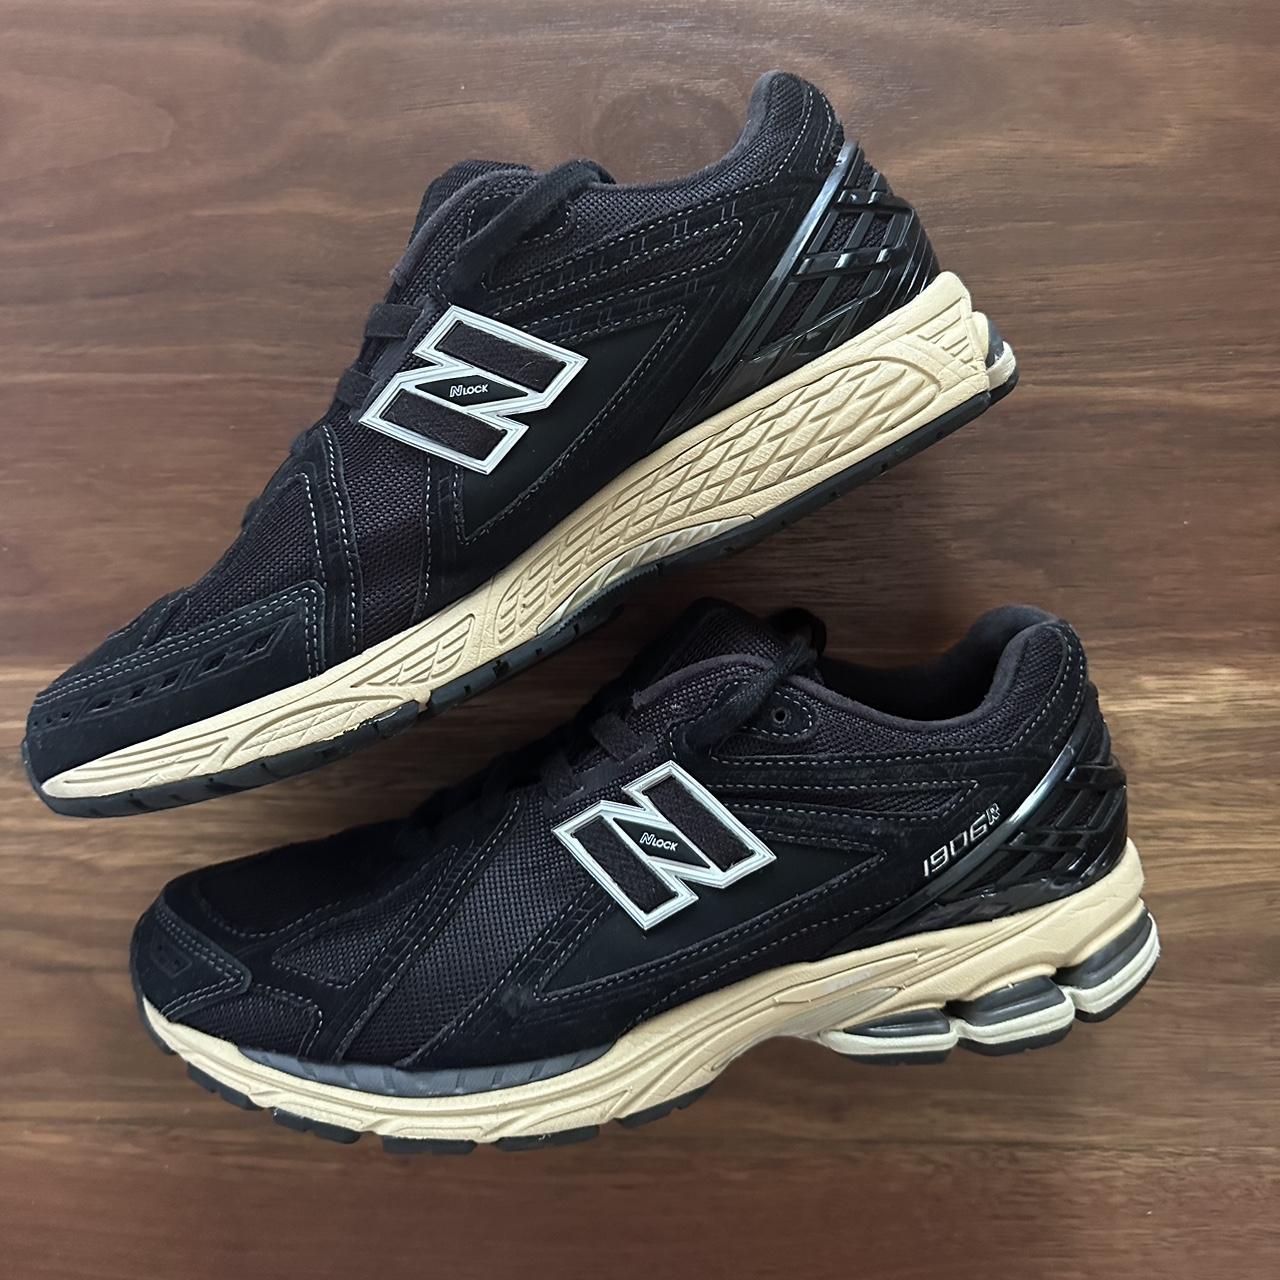 New Balance 1906R ‘Black Taos Taupe’ Only have... - Depop